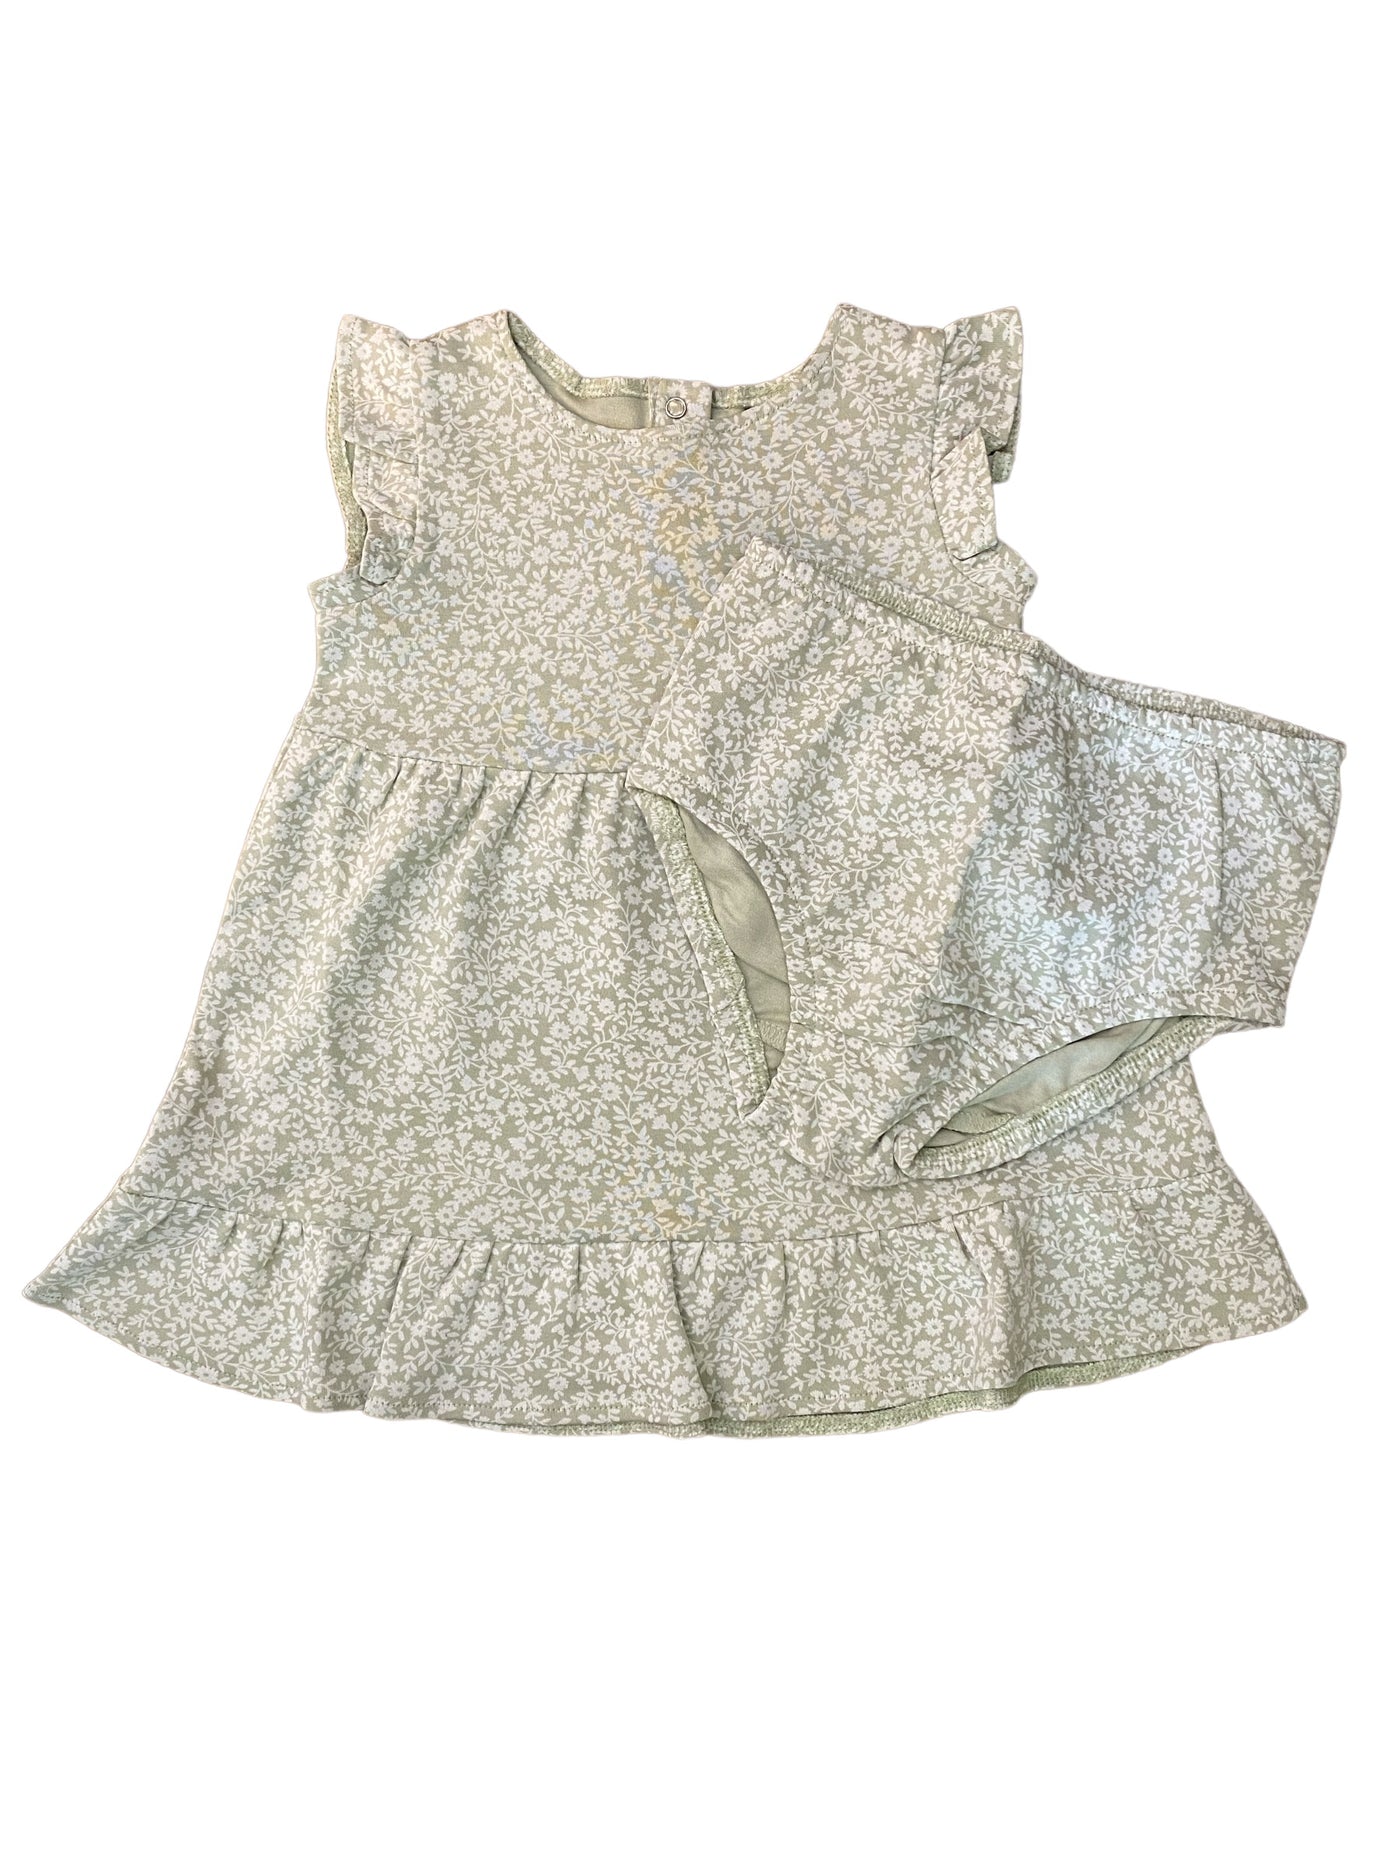 Colored Organics Organic Baby & Kids Tilly Tiered Dress - Gwen Floral / Mint - Simple Good